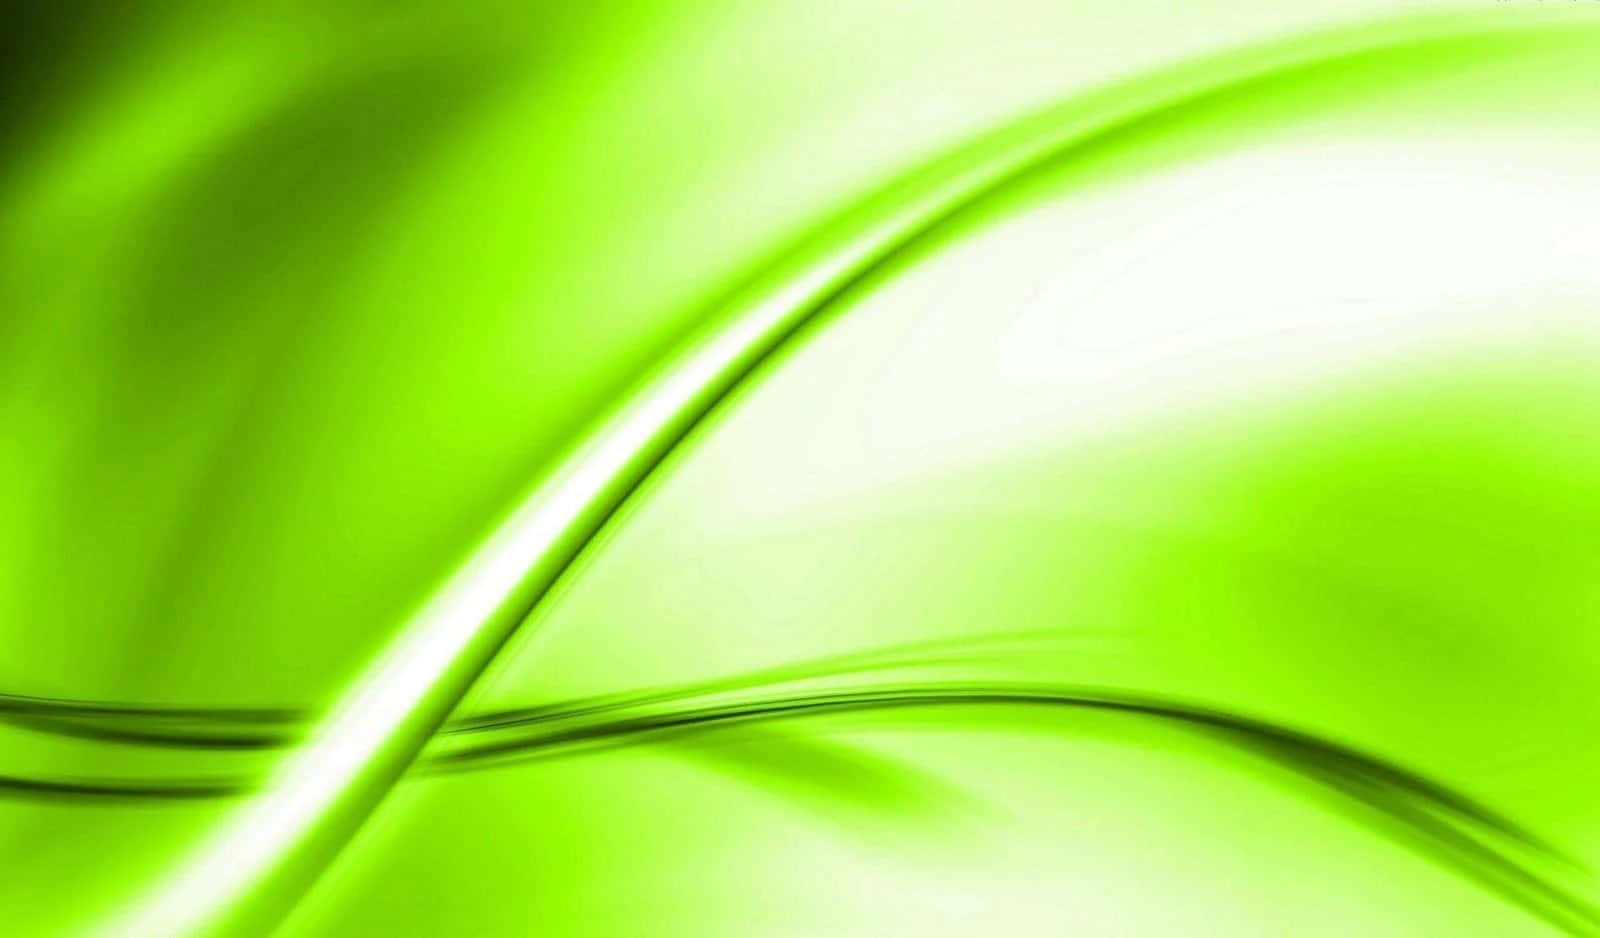 Abstract Light Green Waves Background